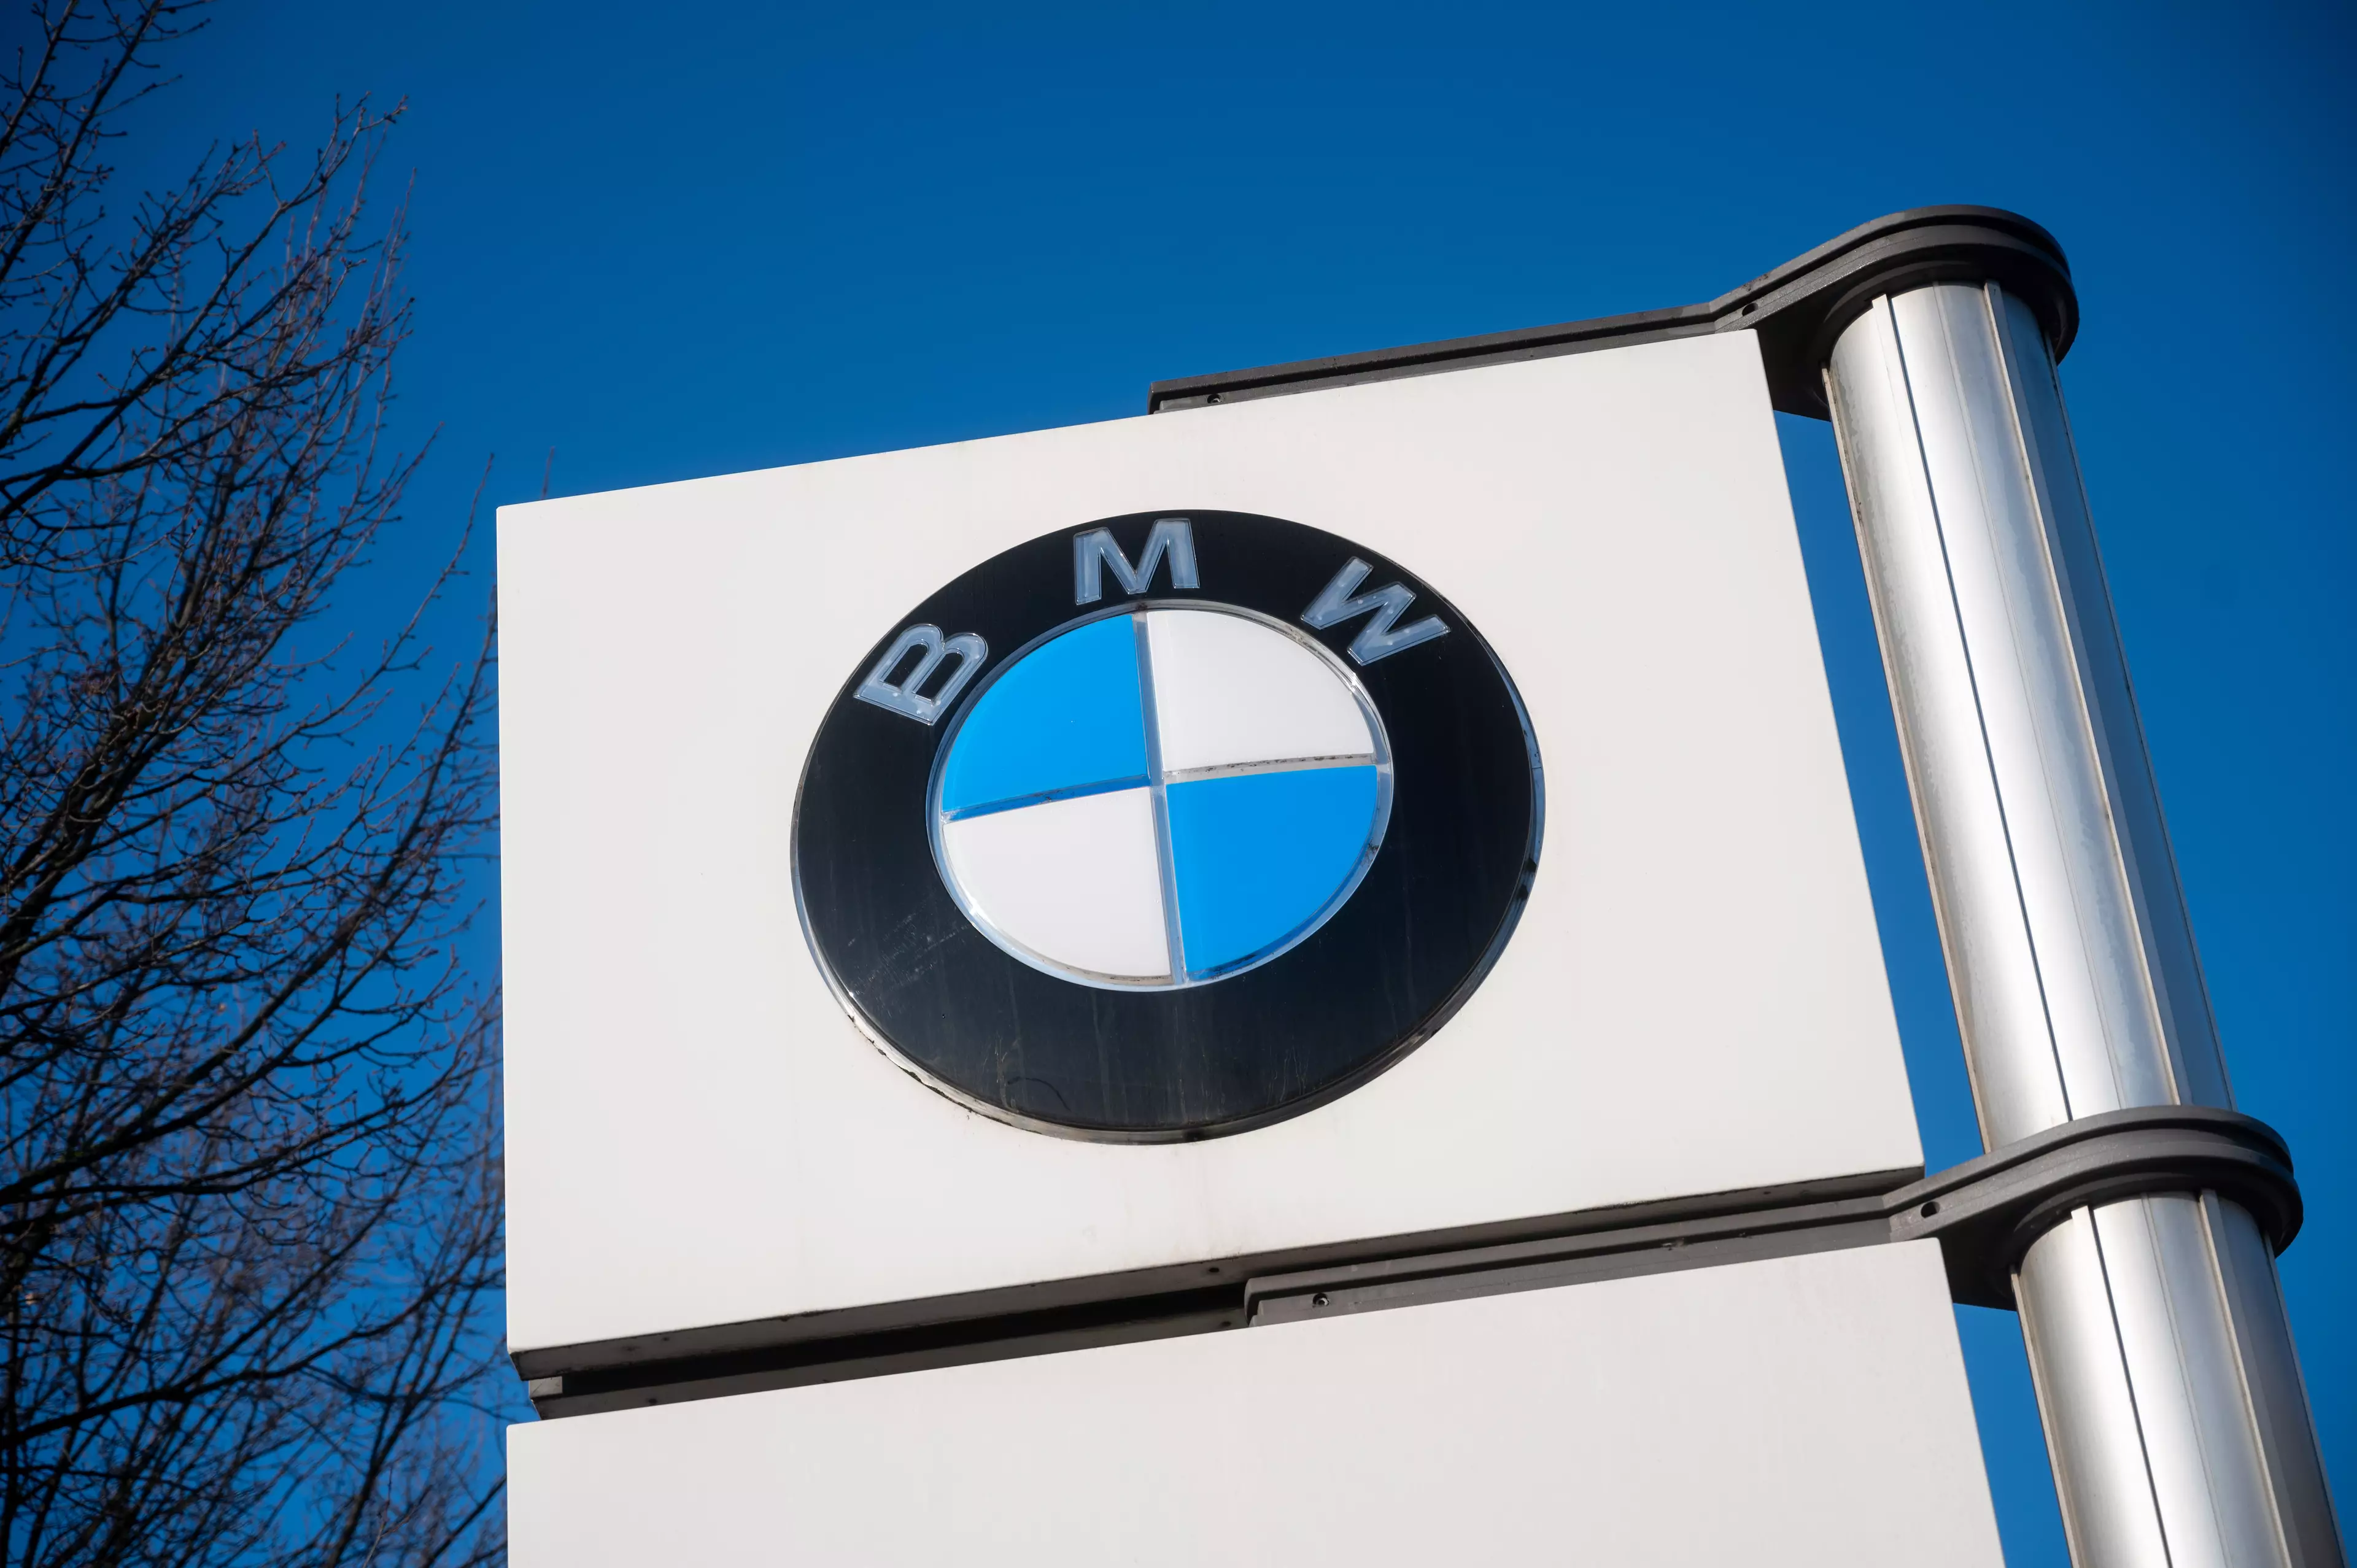 Stock image of the BMW logo.